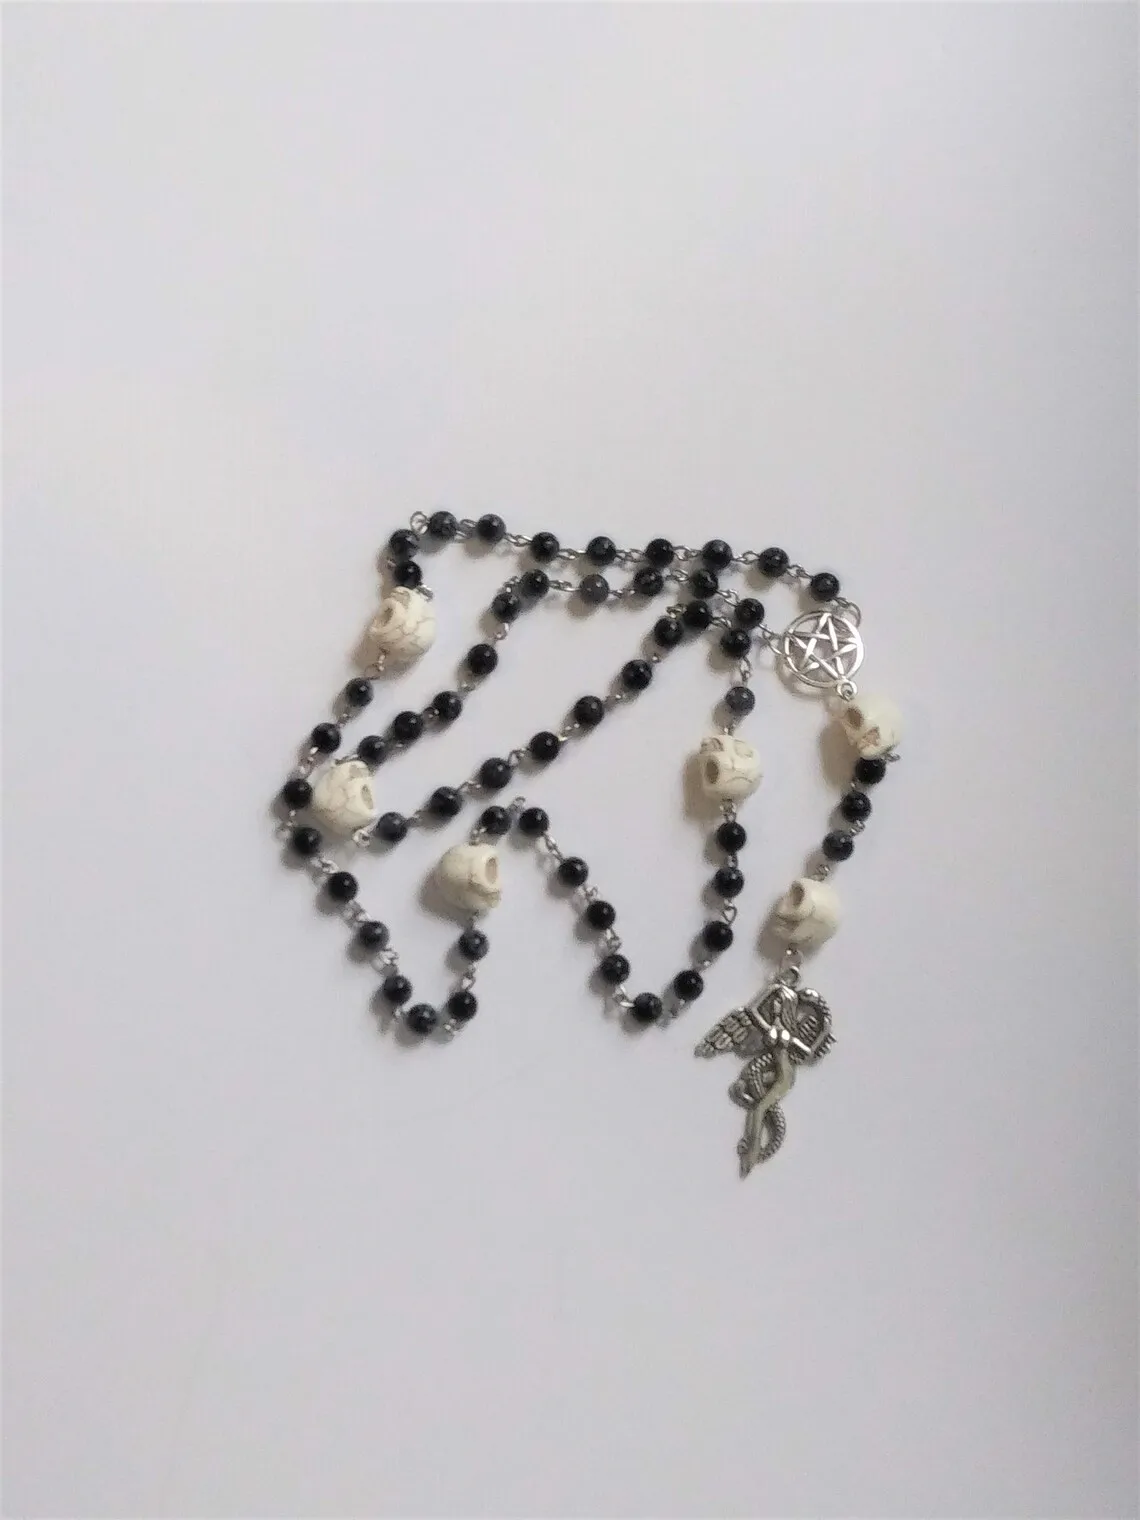 Black skull rosary, Obsidian rosary, Lilith prayer beads, Witch gifts for wife, Sabbat gifts for her, Memento Mori rosary, Pagan